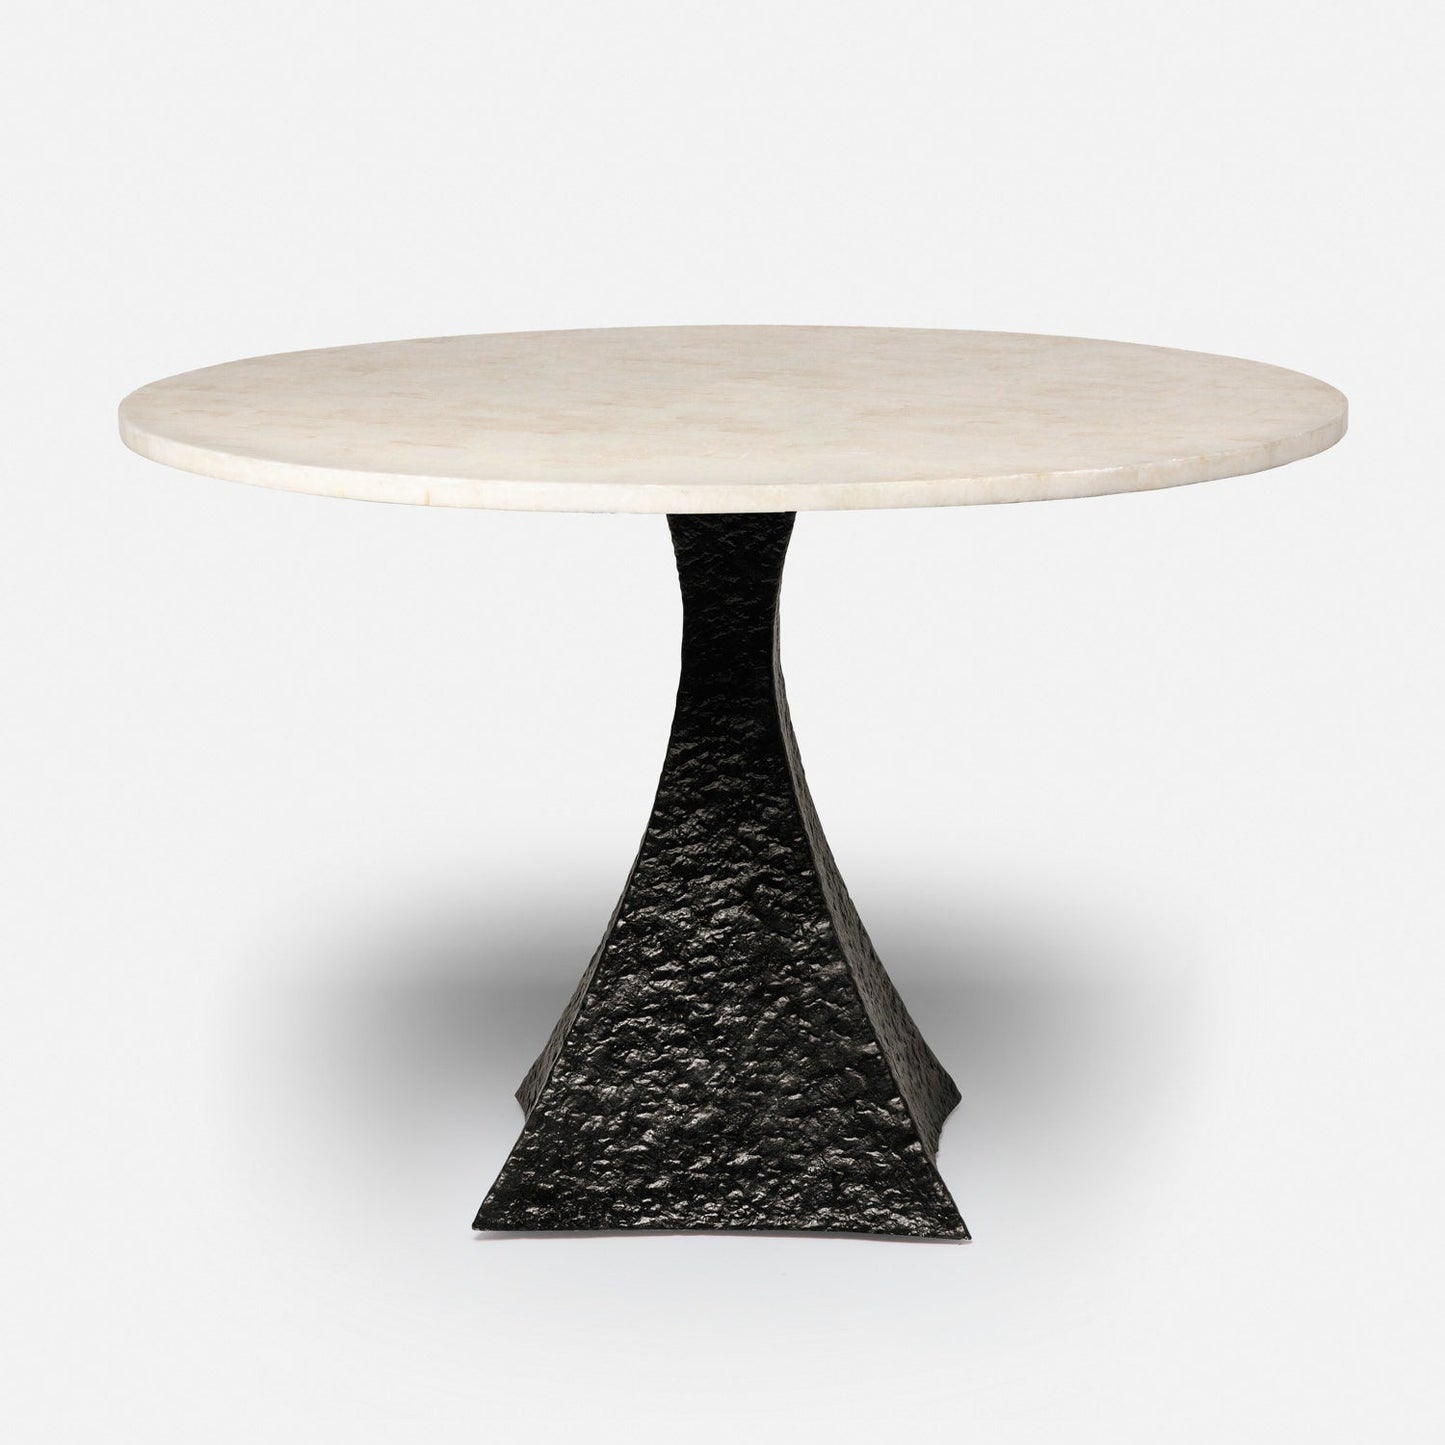 Made Goods Noor 48" x 30" Bumpy Black Iron Dinning Table With Round Ice Crystal Stone Table Top